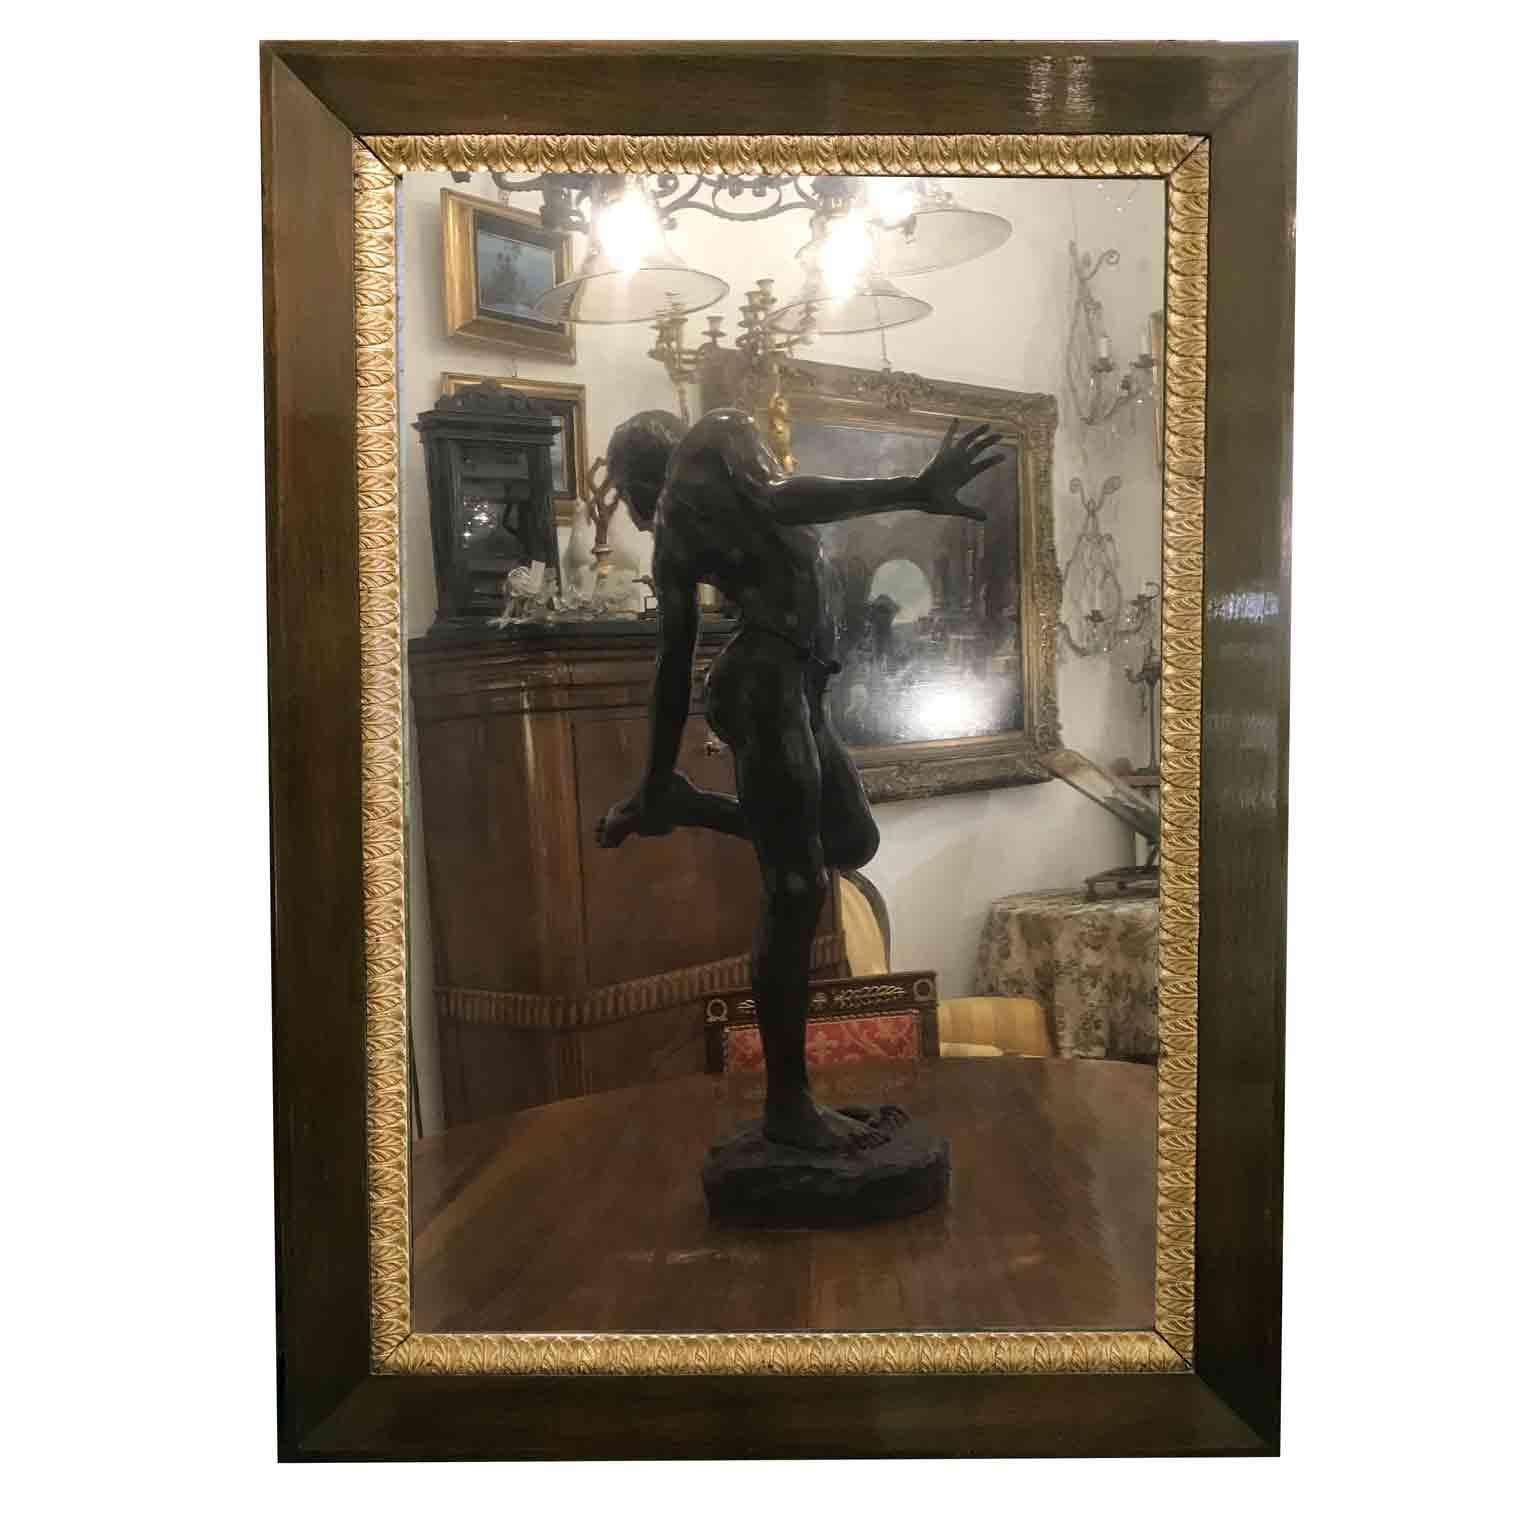 Early 19th century Empire mirror, a solid walnut rectangular frame decorated with a gilt plaster profile, a gilt gesso internal frame decorated with palmette, centered by an original mercury mirror. French origin.
Two lateral holes let us know this